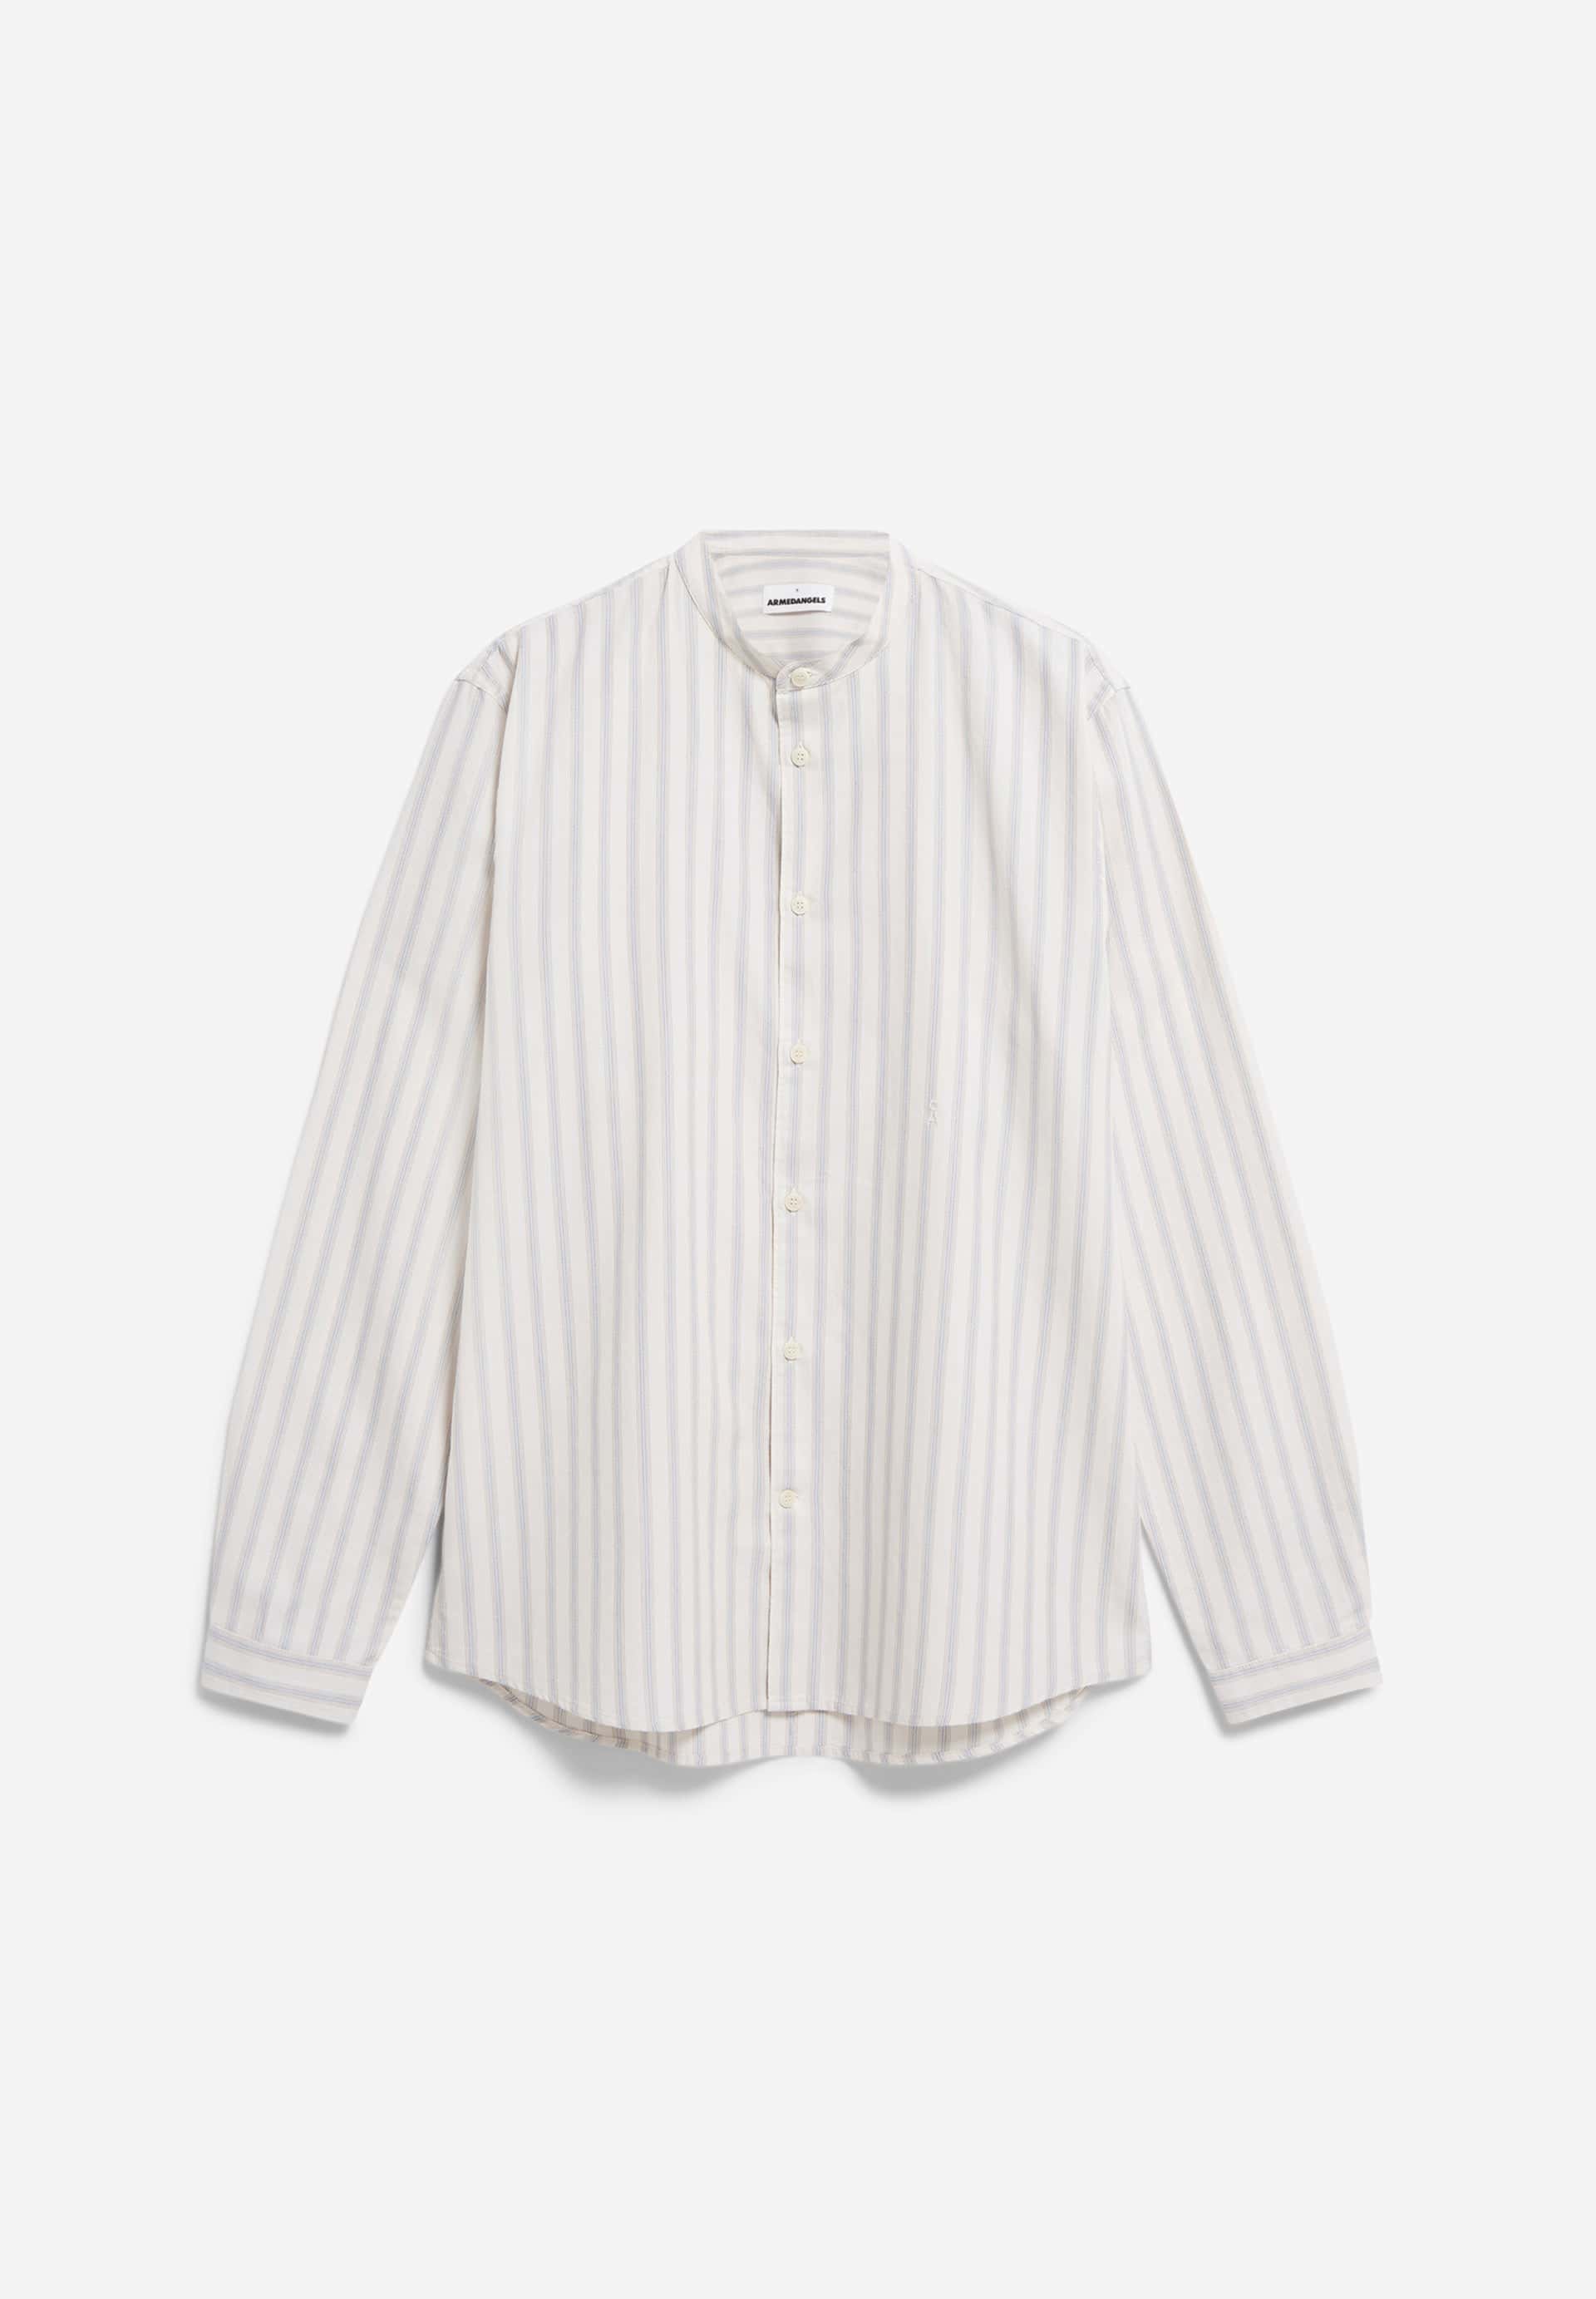 VAALERONIMUS STRIPES Shirt Relaxed Fit made of Organic Cotton